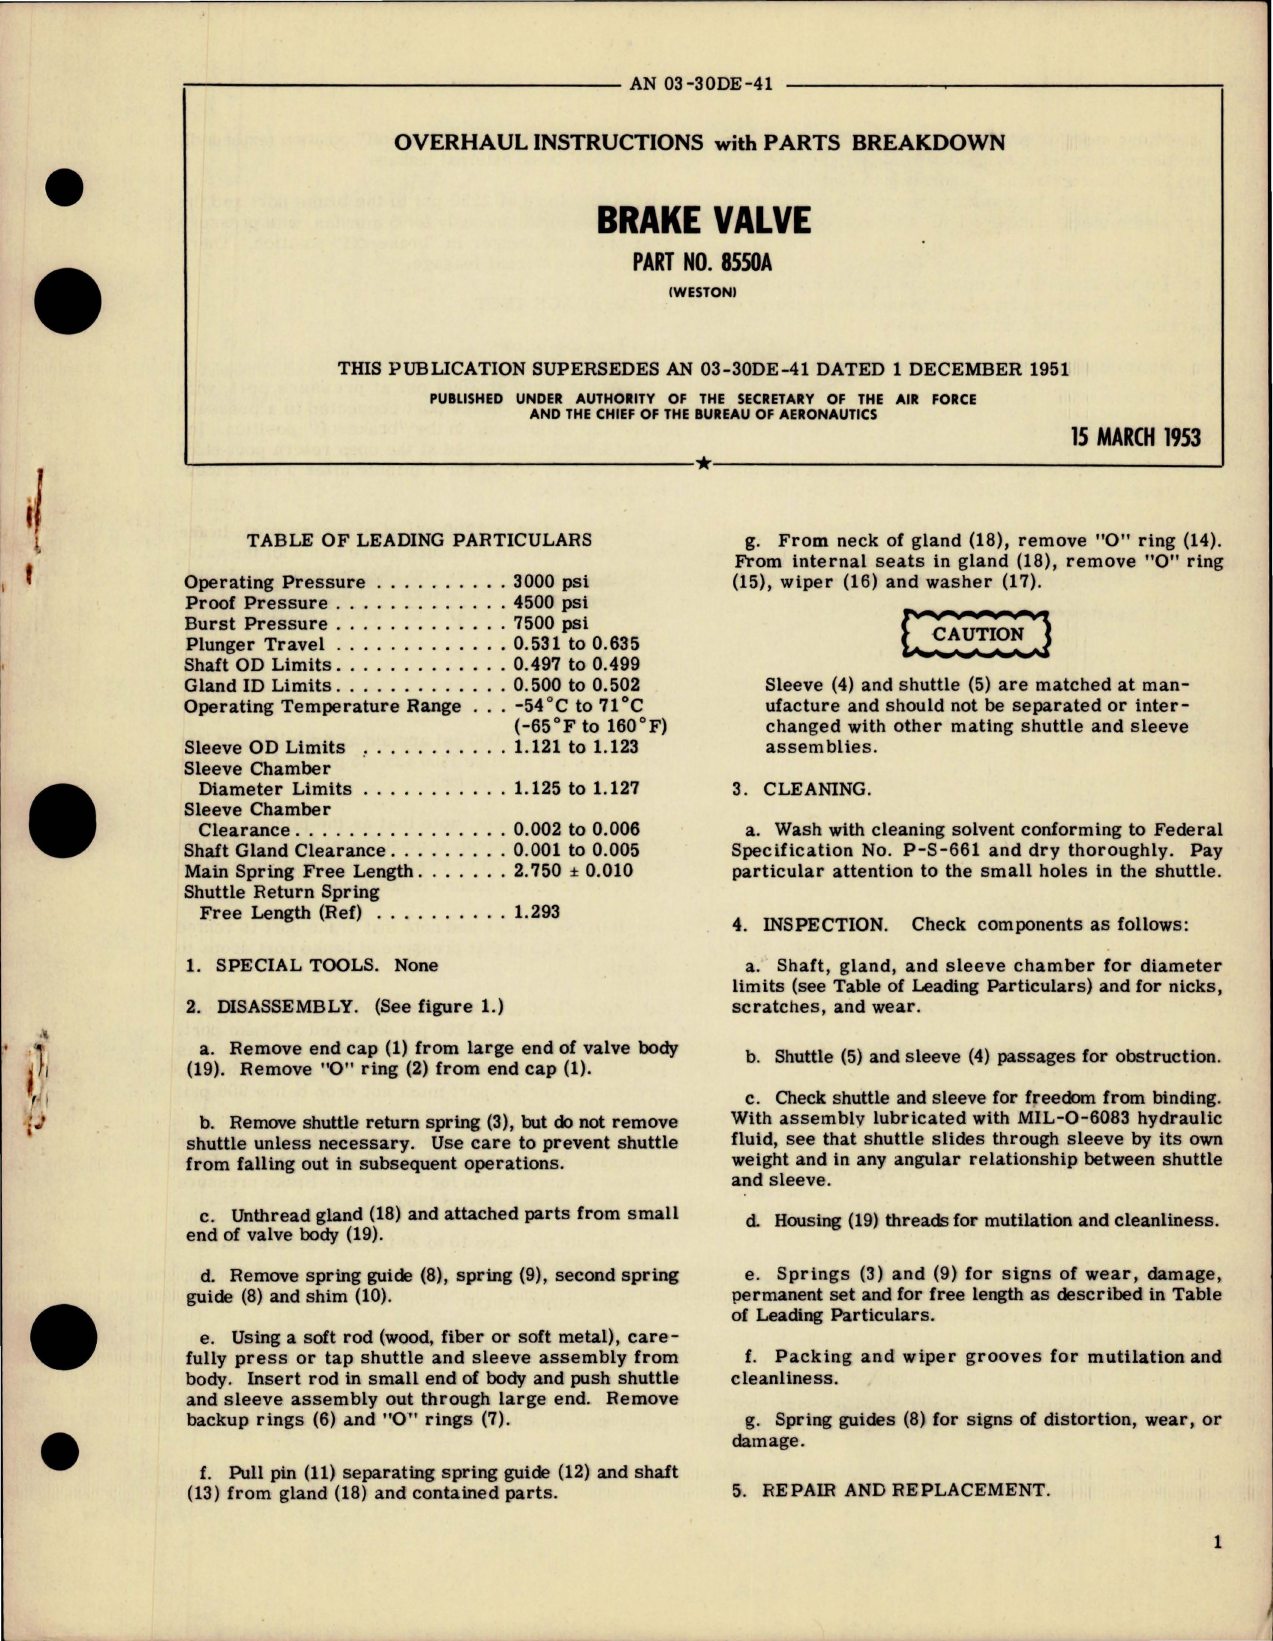 Sample page 1 from AirCorps Library document: Overhaul Instructions with Parts Breakdown for Brake Valve - Part 8550A 